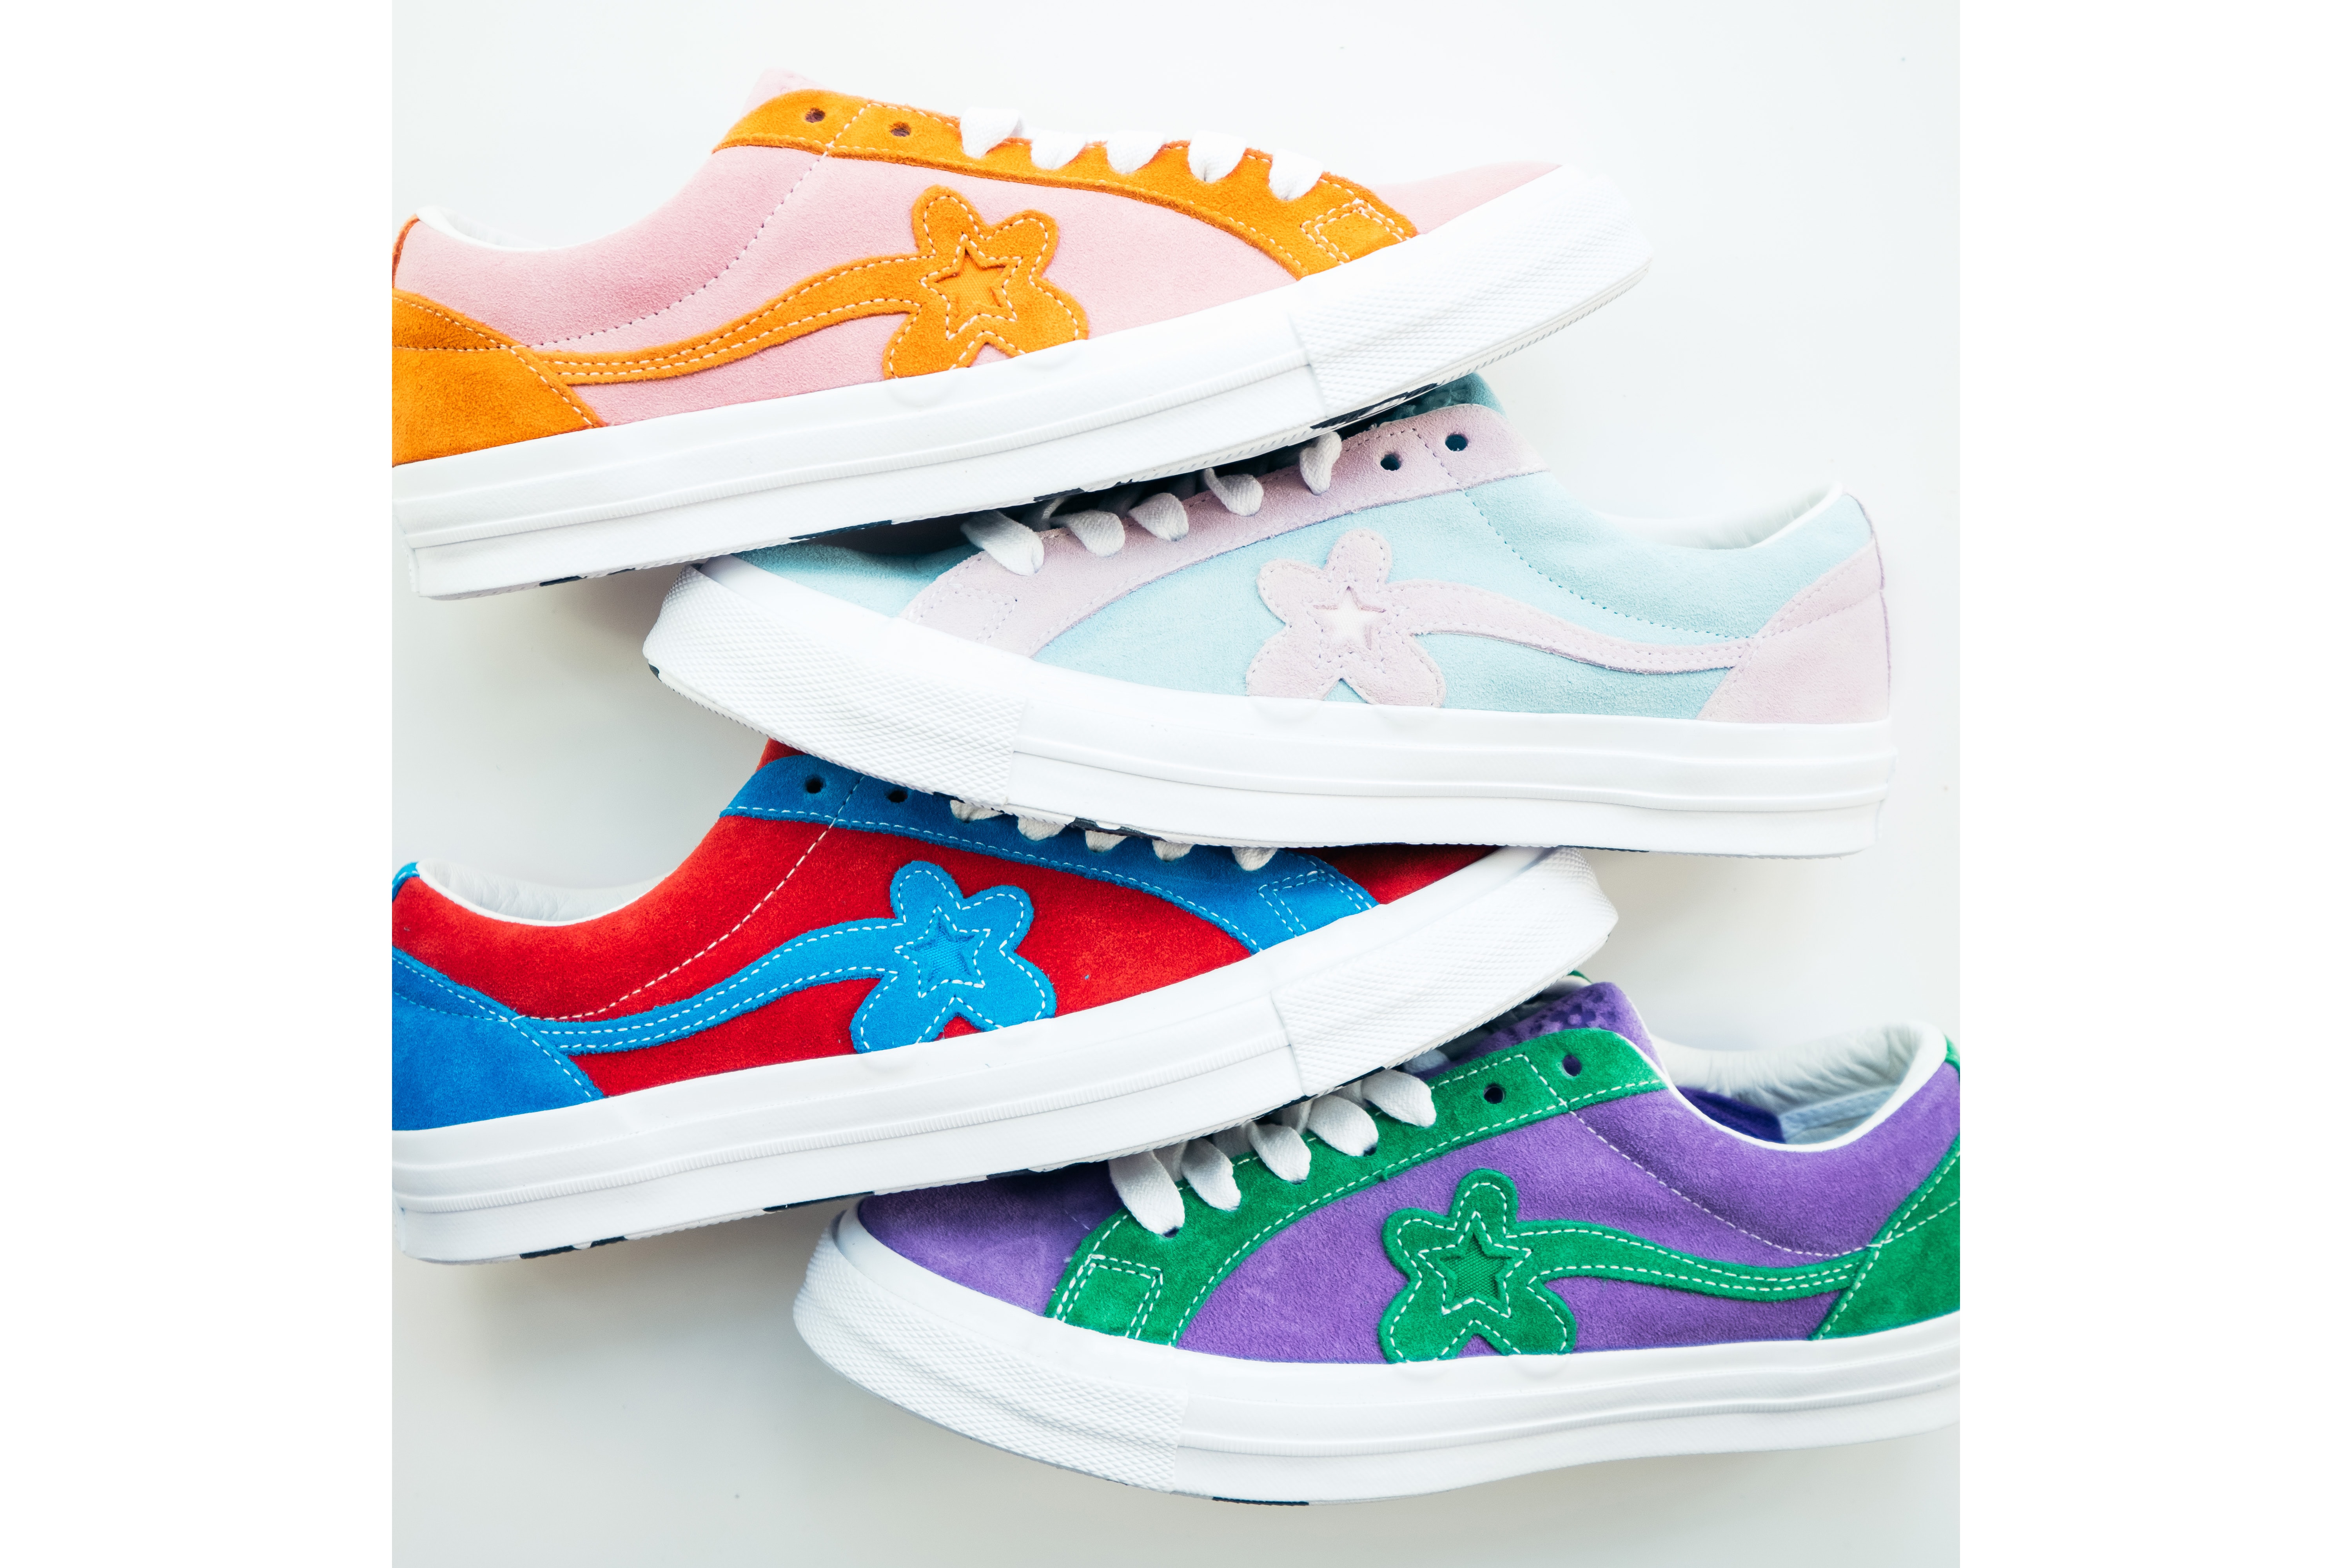 Converse GOLF Le FLEUR One Star Collection Tyler the Creator Sneaker Shoe Collaboration Pastel Color Spring Summer